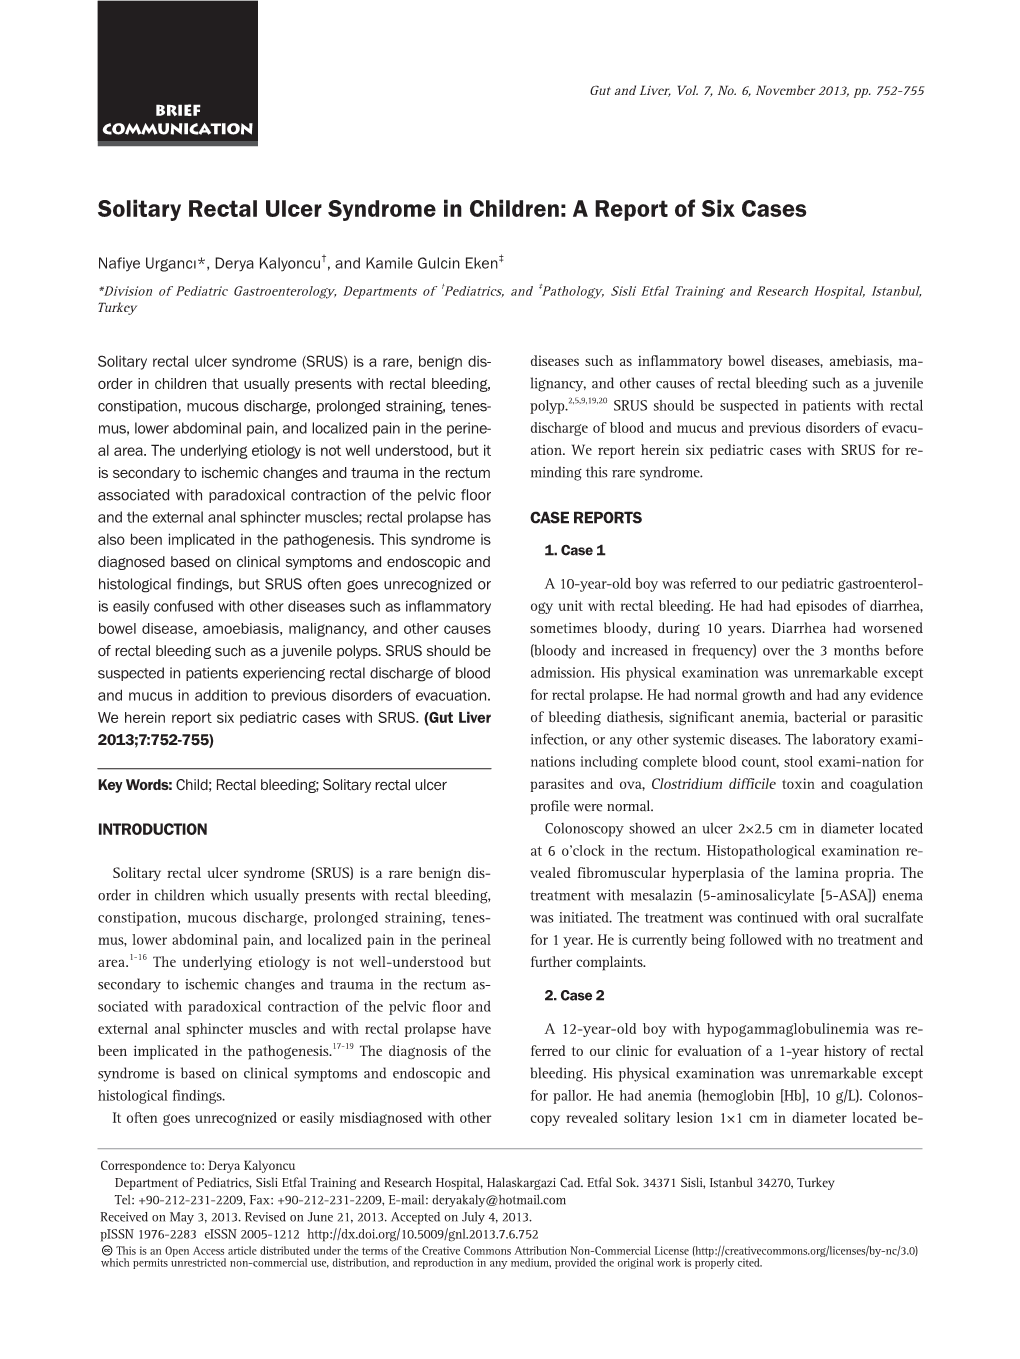 Solitary Rectal Ulcer Syndrome in Children: a Report of Six Cases